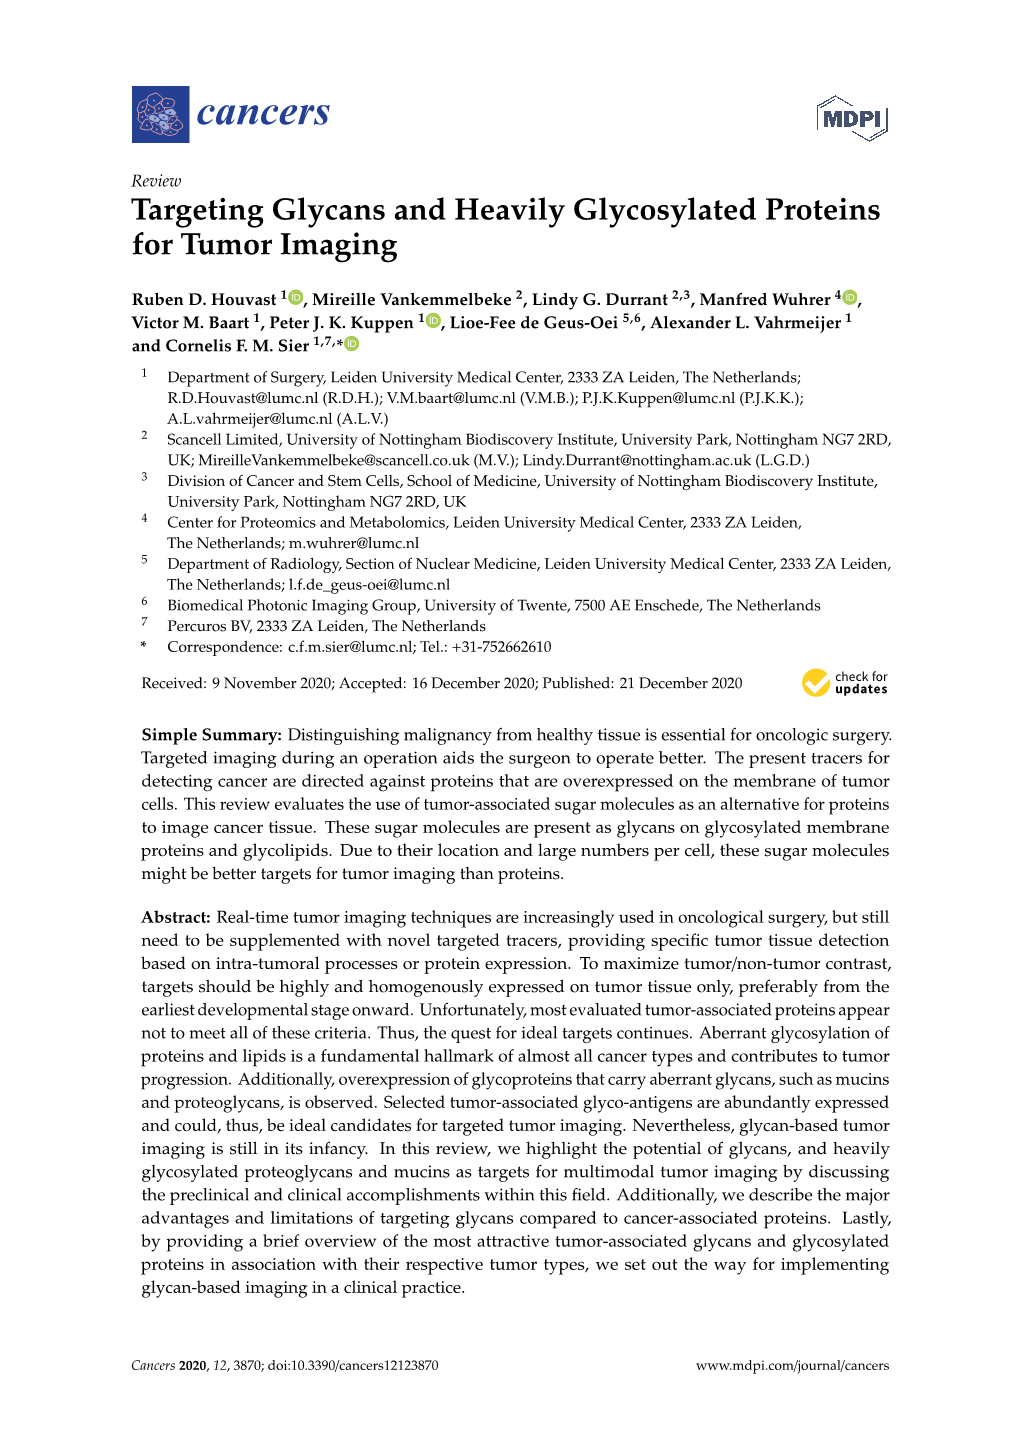 Targeting Glycans and Heavily Glycosylated Proteins for Tumor Imaging